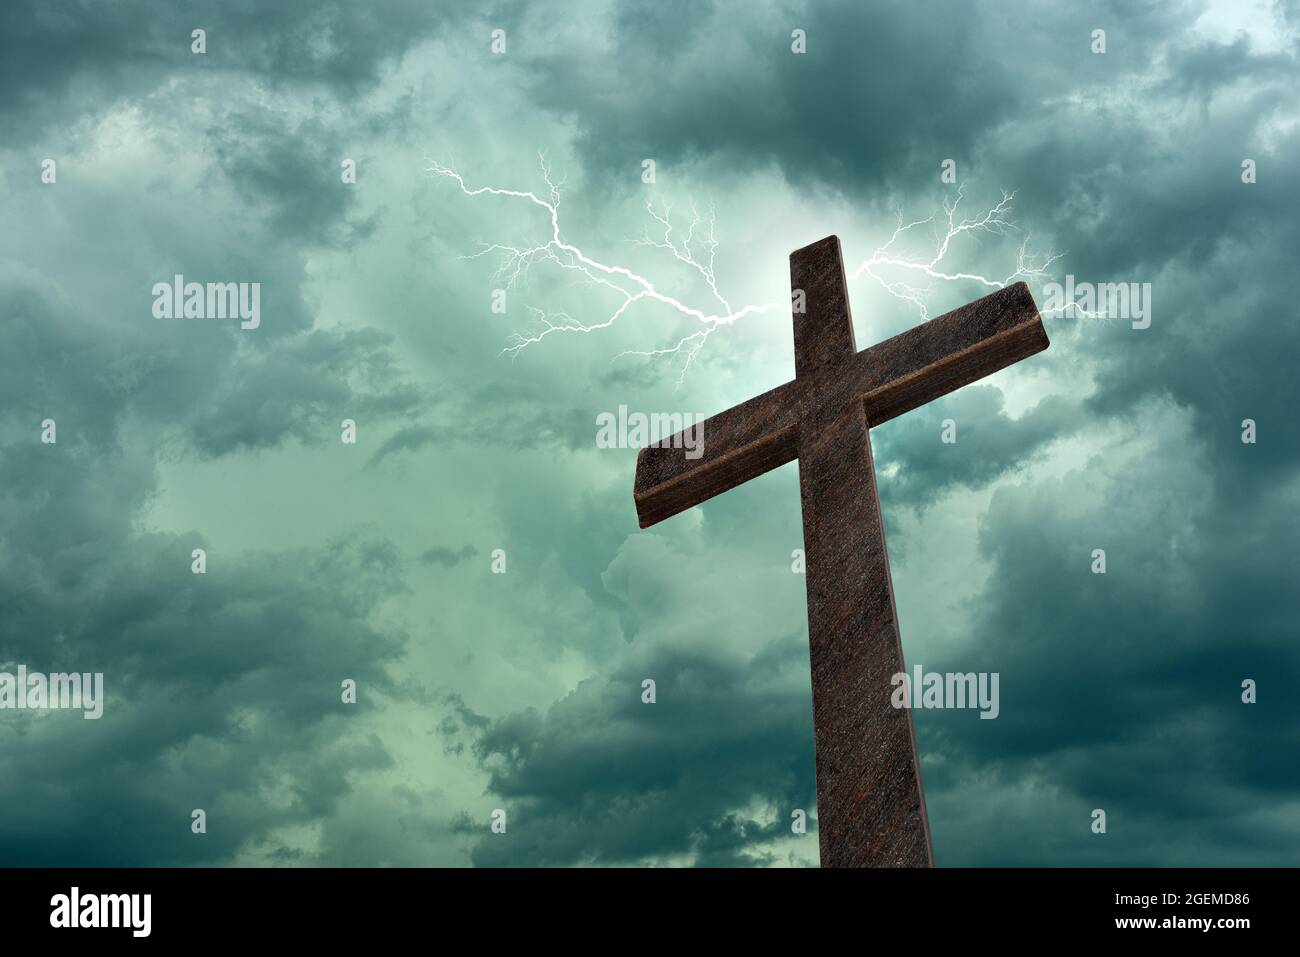 Dramatic image showing a religious church cross framed against a sky of lightning, bright light and sun rays, showing the coming of the Lord.  Copy sp Stock Photo